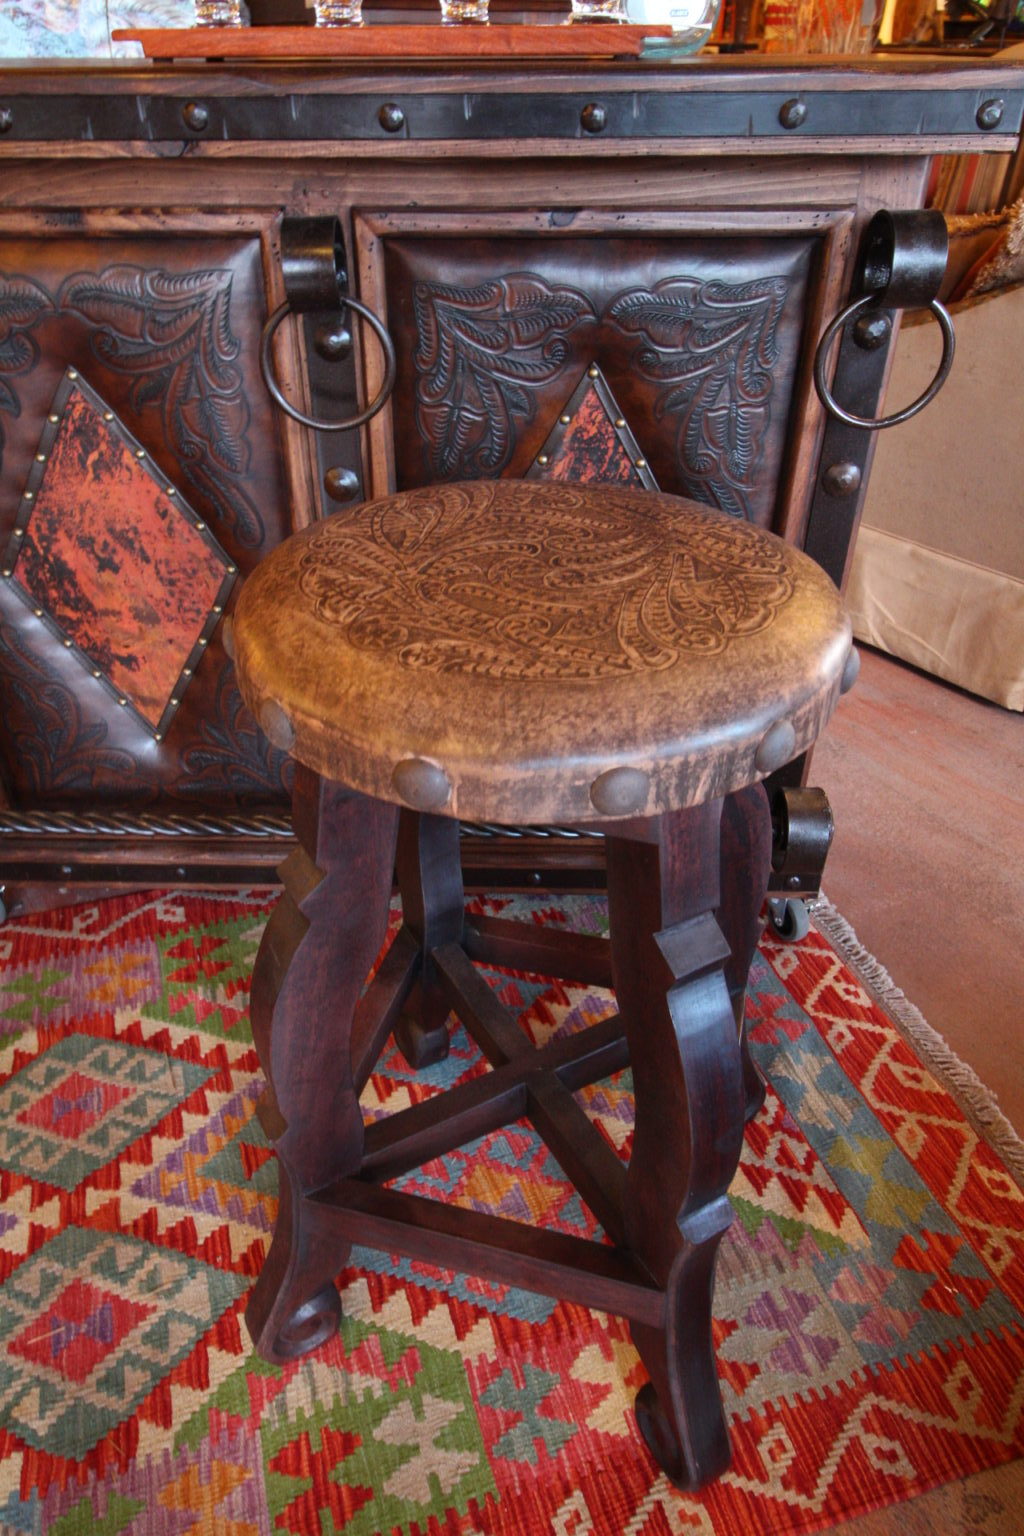 Round Tooled Leather Stool in Vintage Café